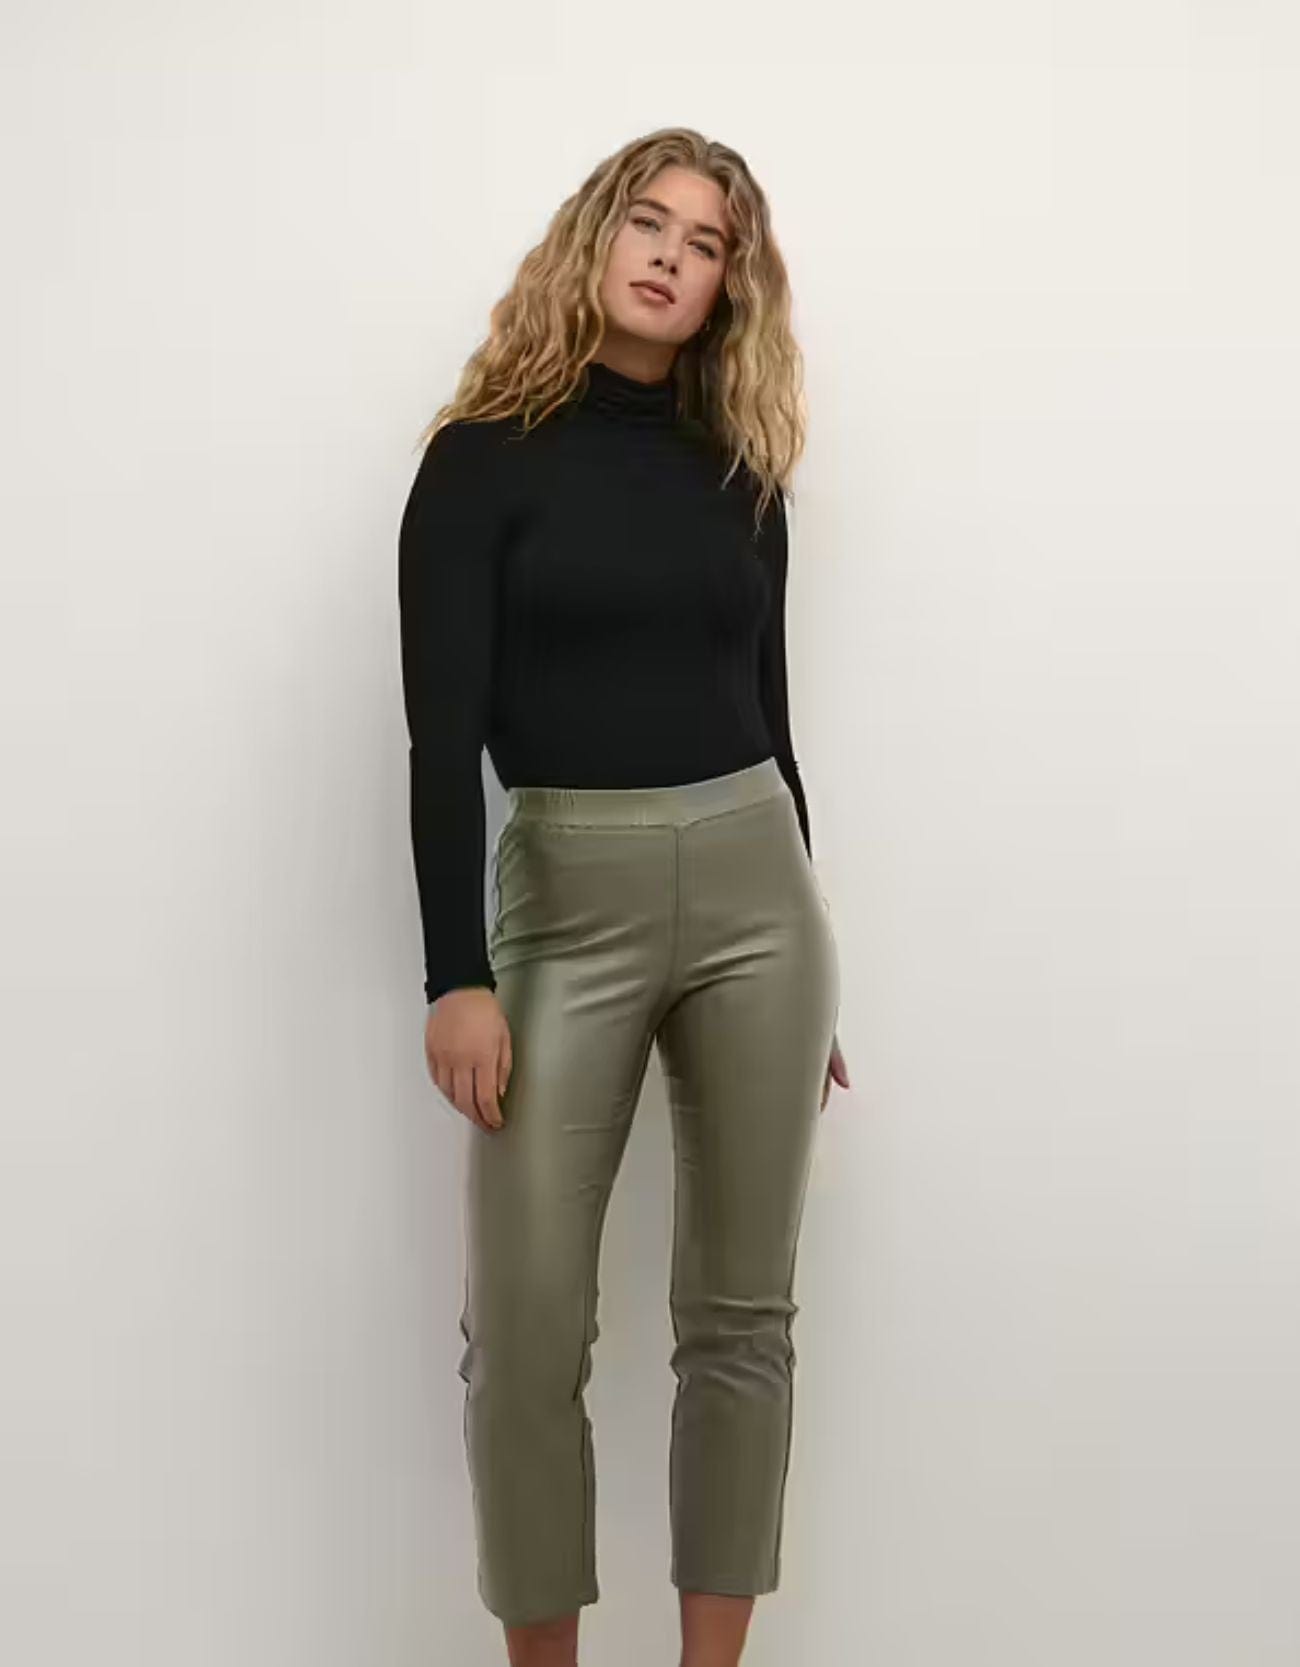 Kaffe Ada Crop Jeggings FOREST NIGHT – Lolly's Fashion Lounge